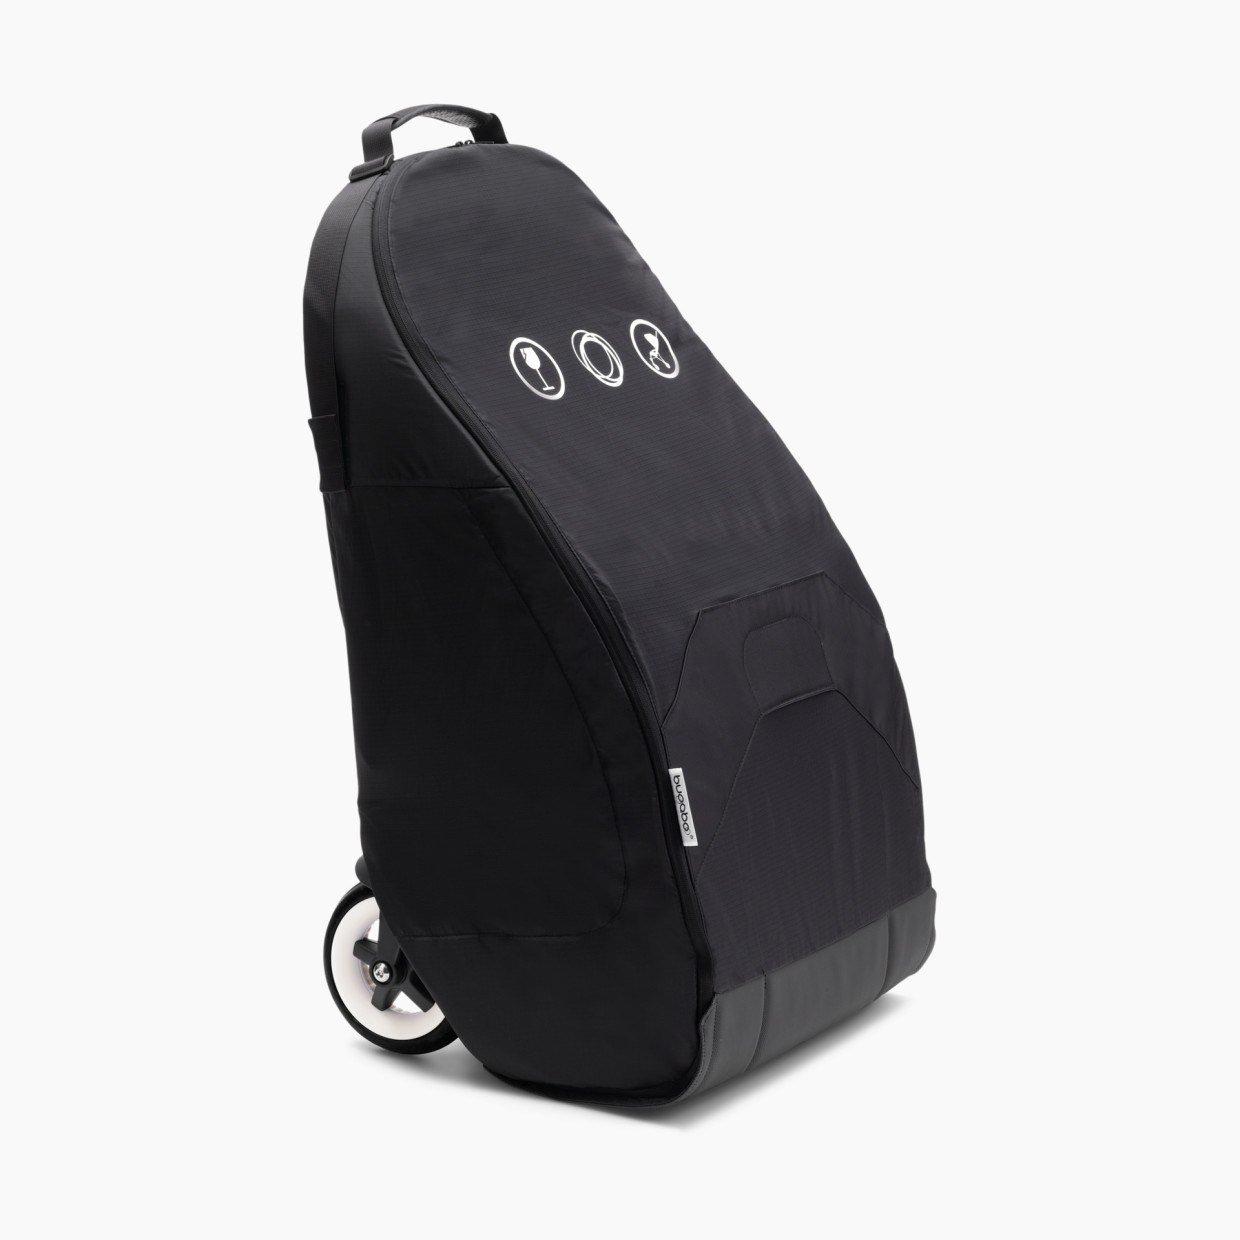 Bugaboo Compact Transport Bag for Bugaboo Strollers - Black.